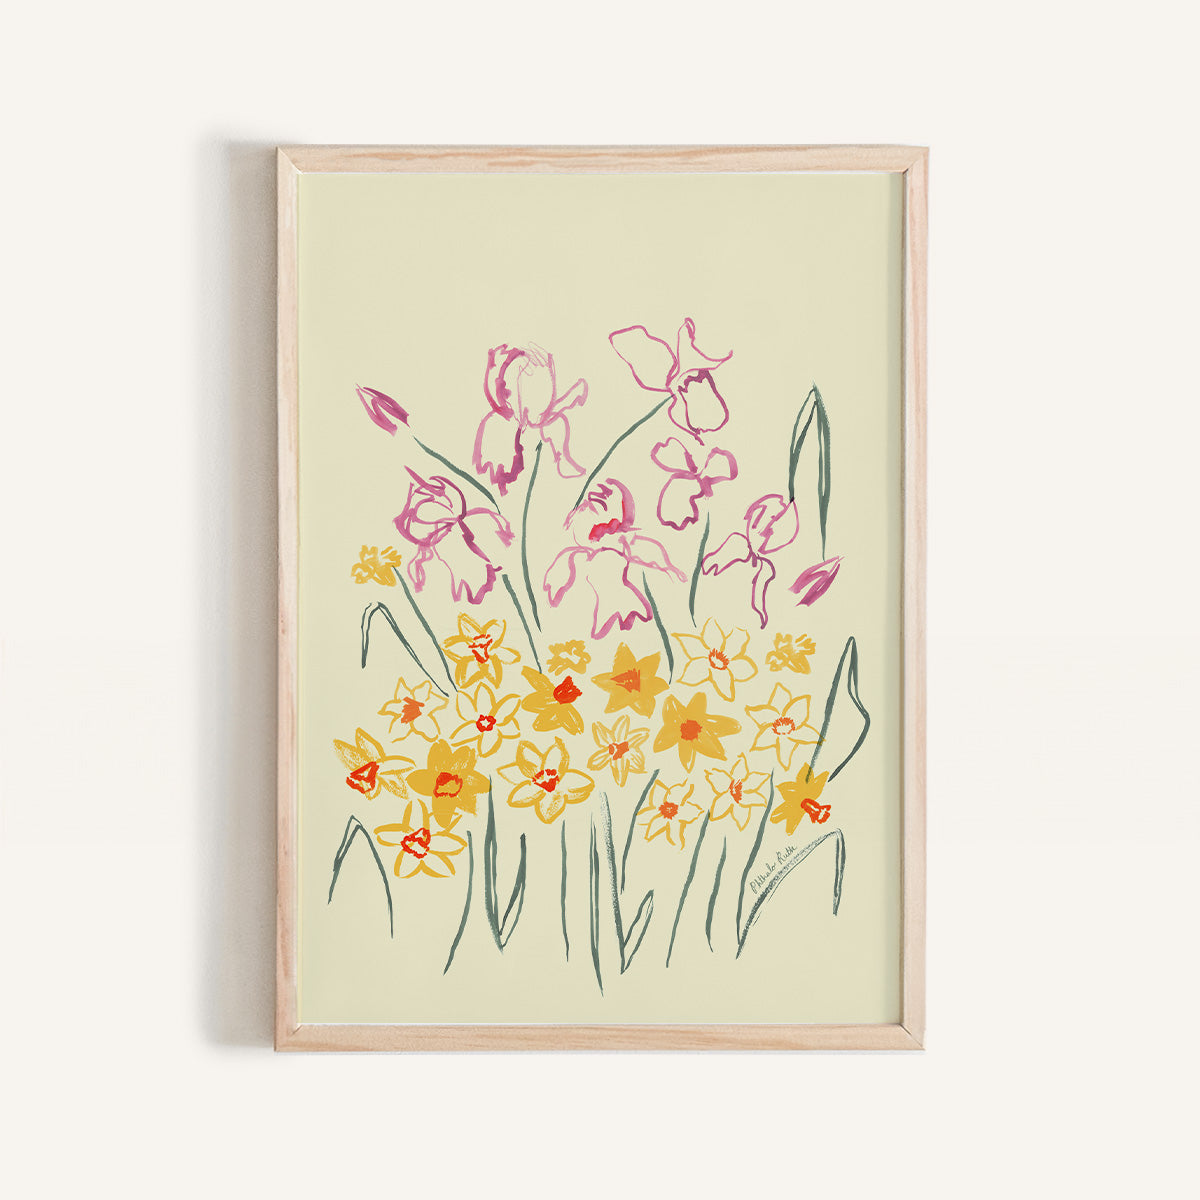 This mini print features yellow and pink flowers, playfully drawn among greenery on a white background.